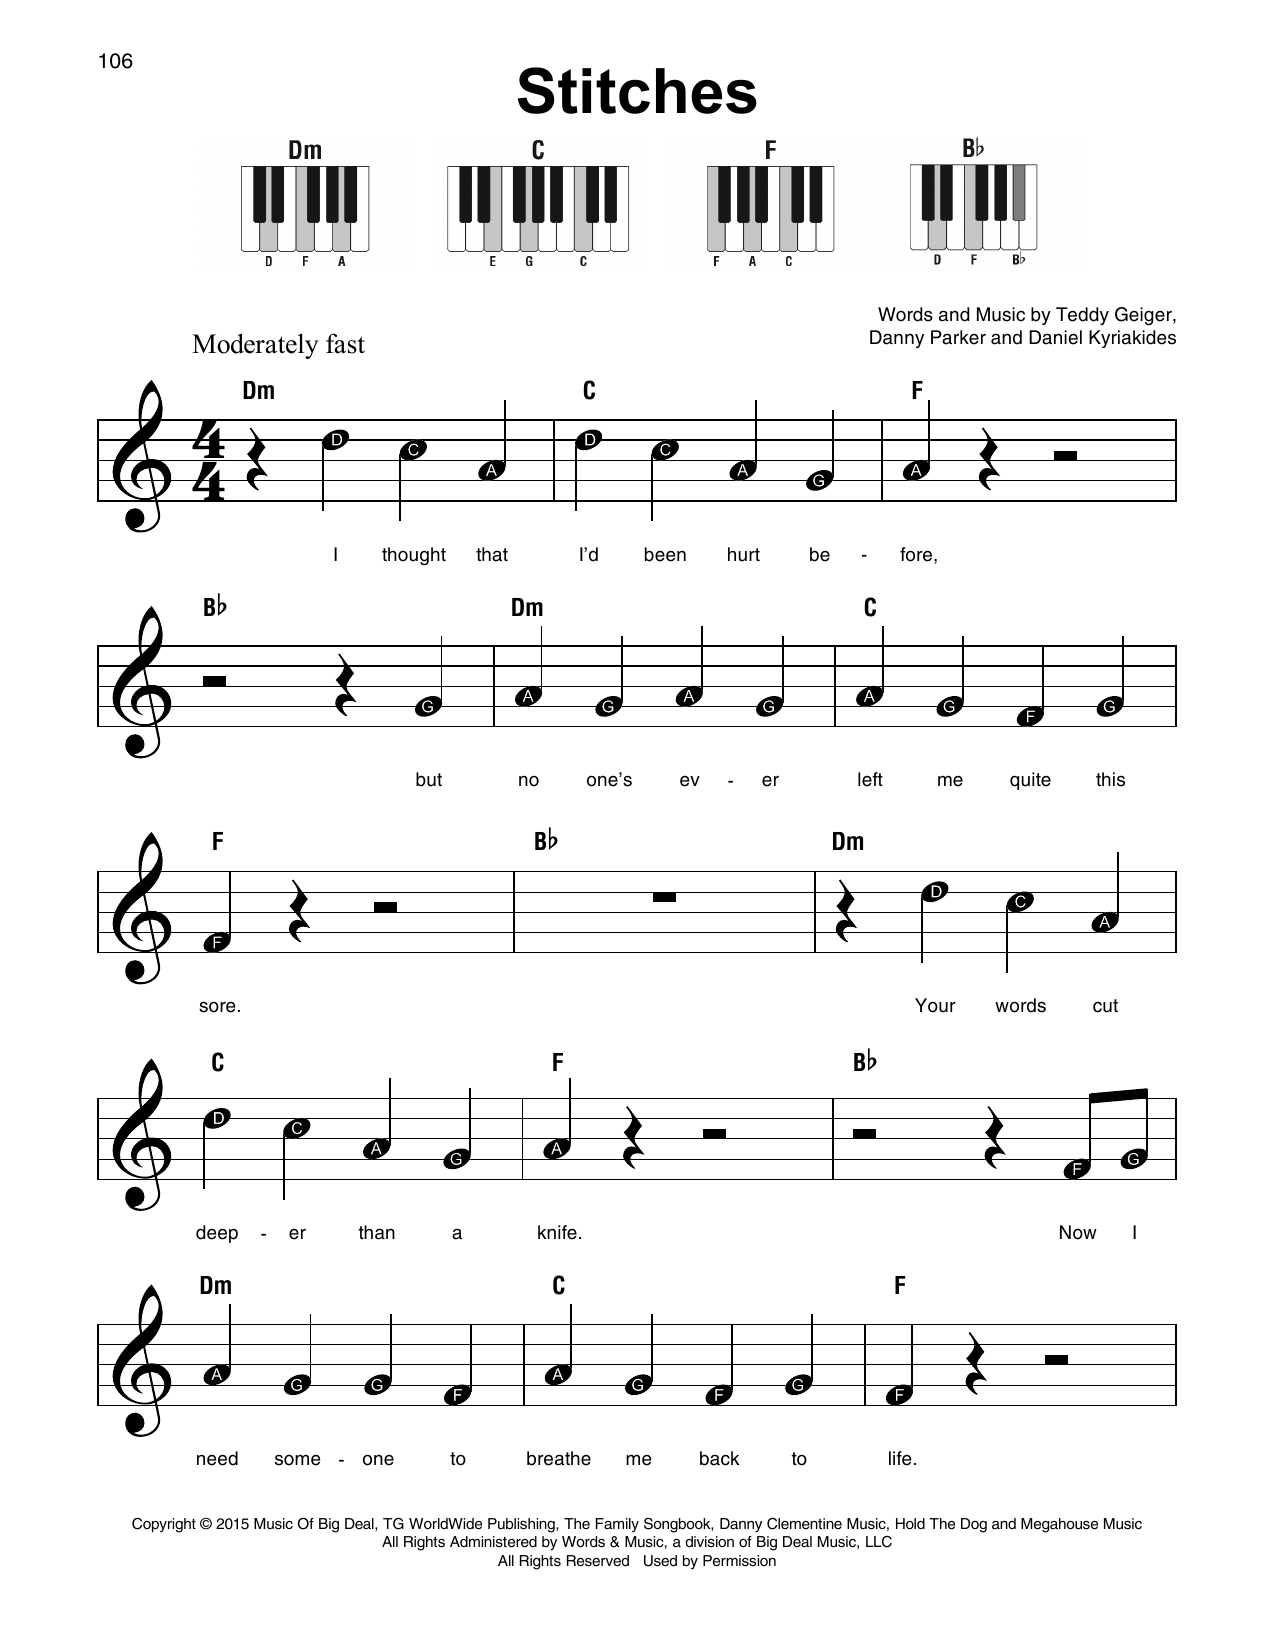 Stitches sheet music by Shawn Mendes (Super Easy Piano – 179337)